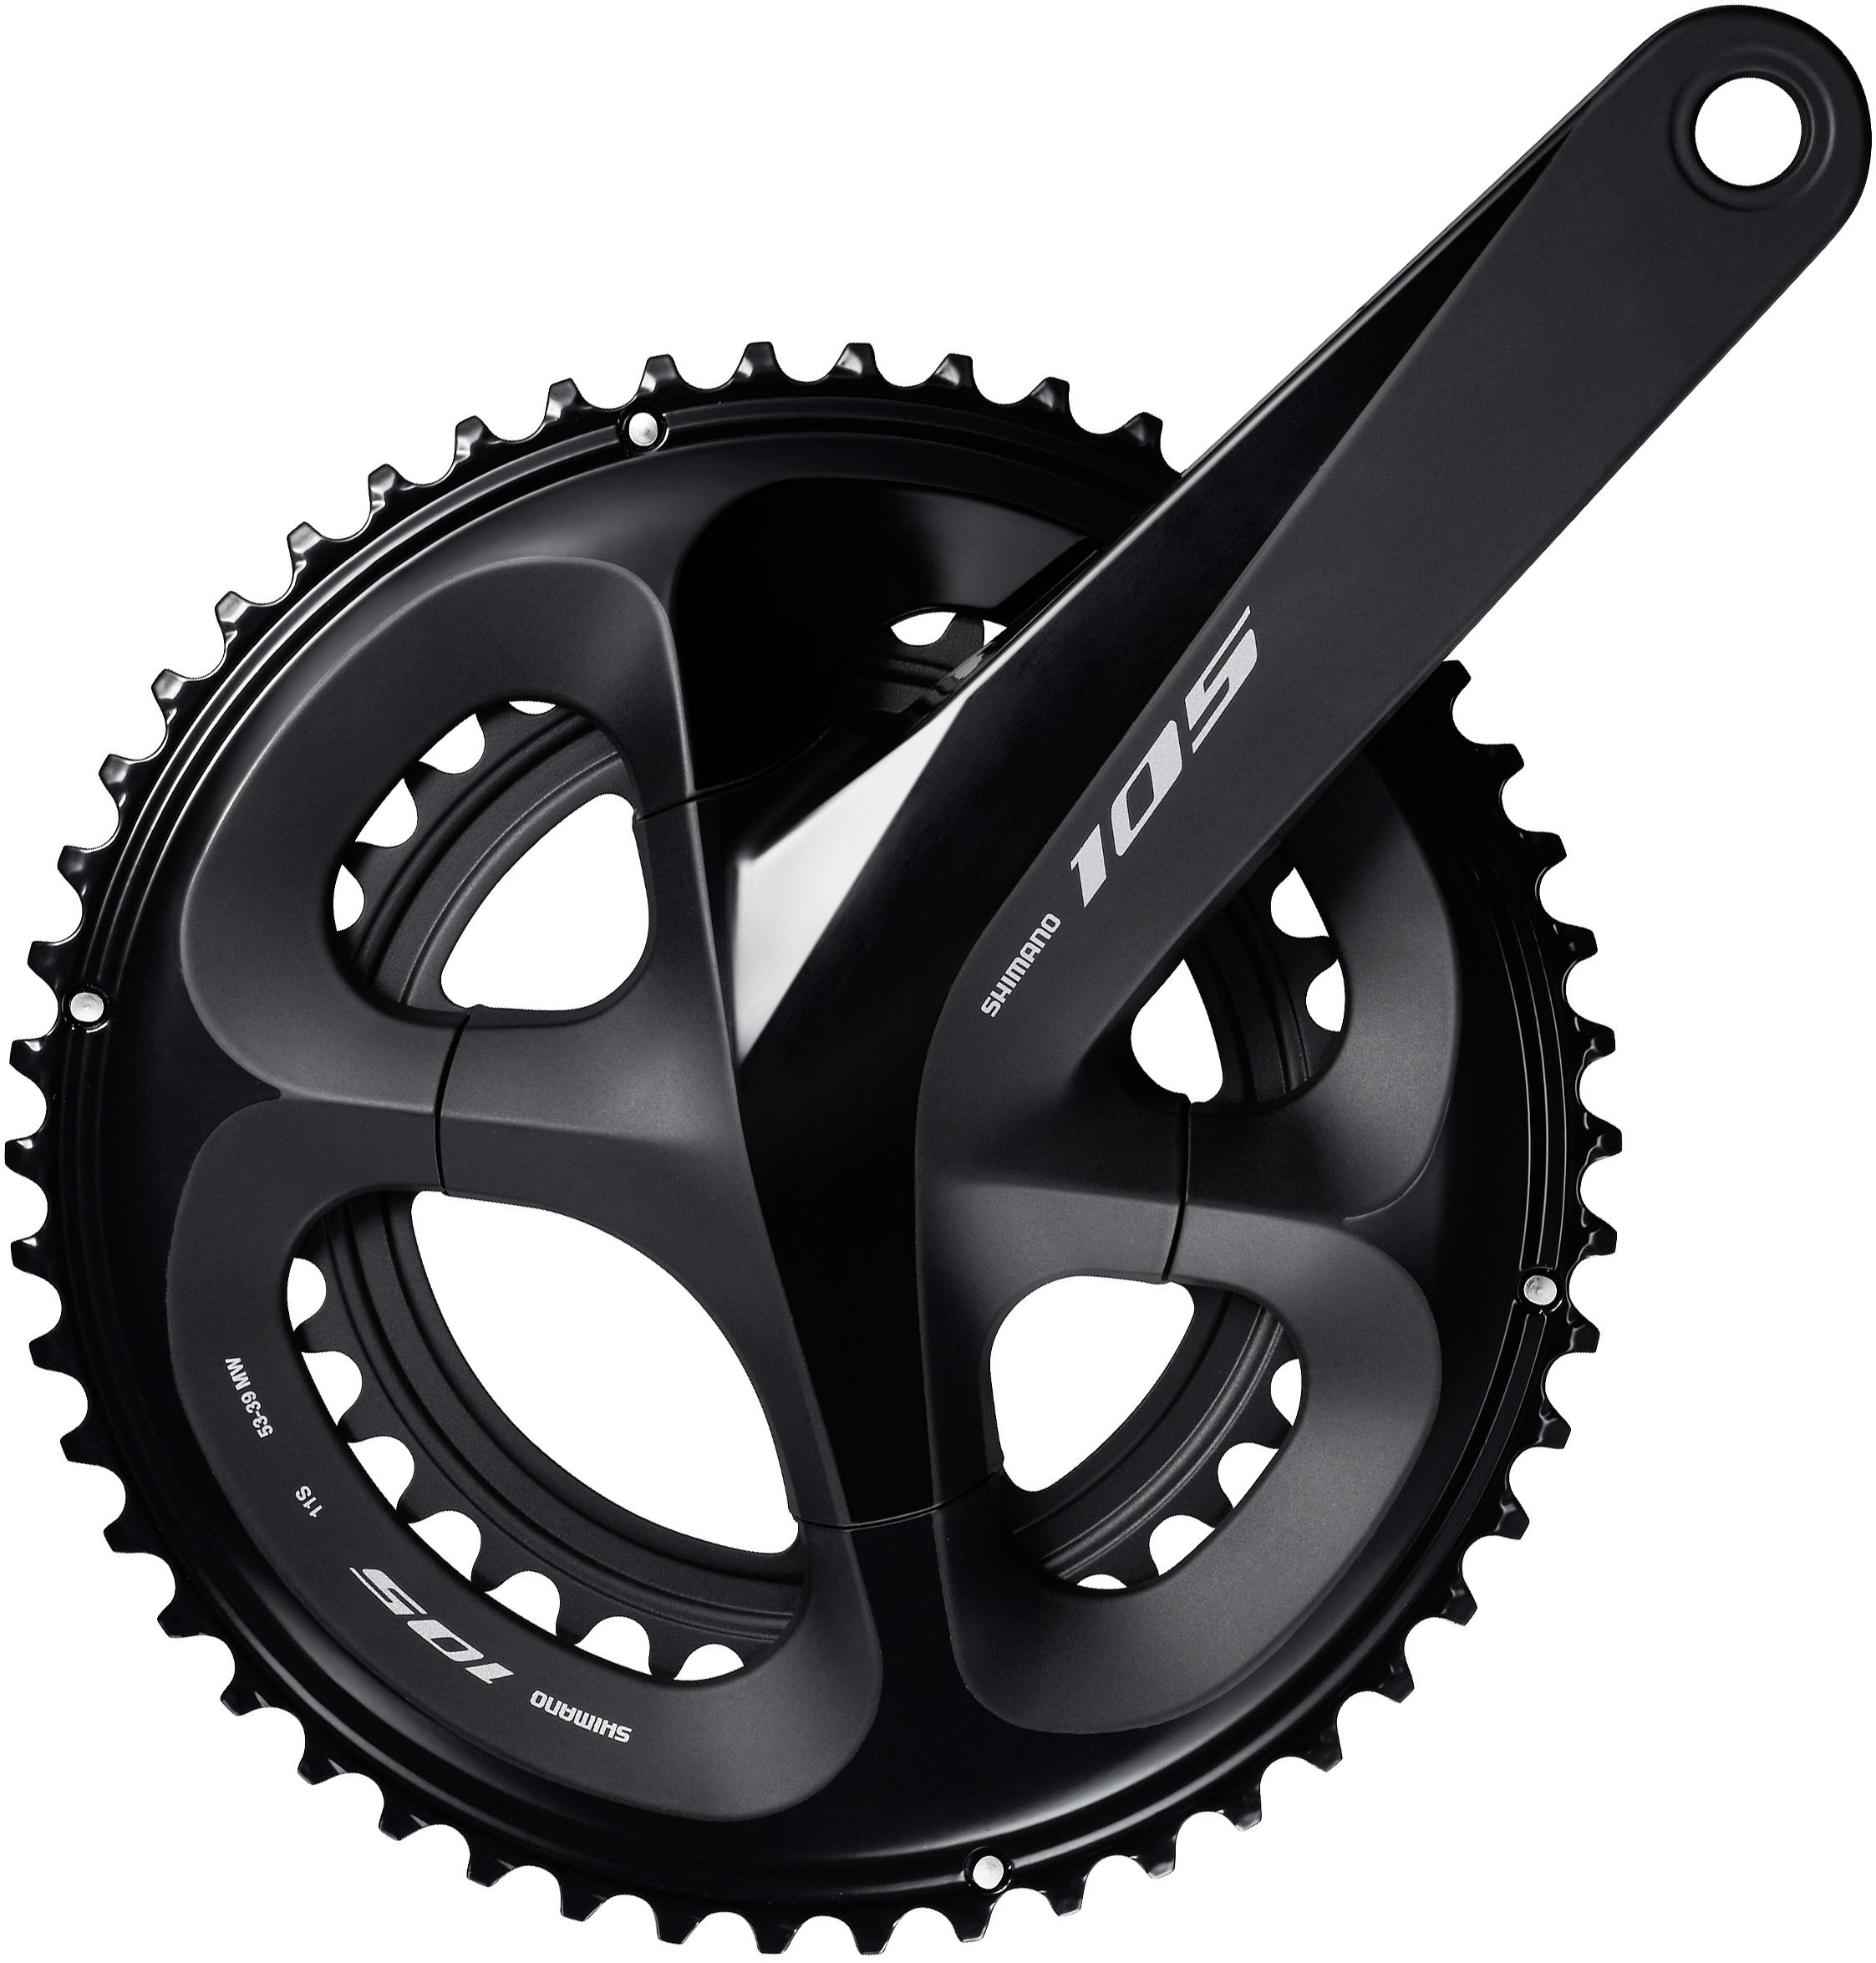 Shimano 105 R7000 11 Speed Road Double Chainset  Black